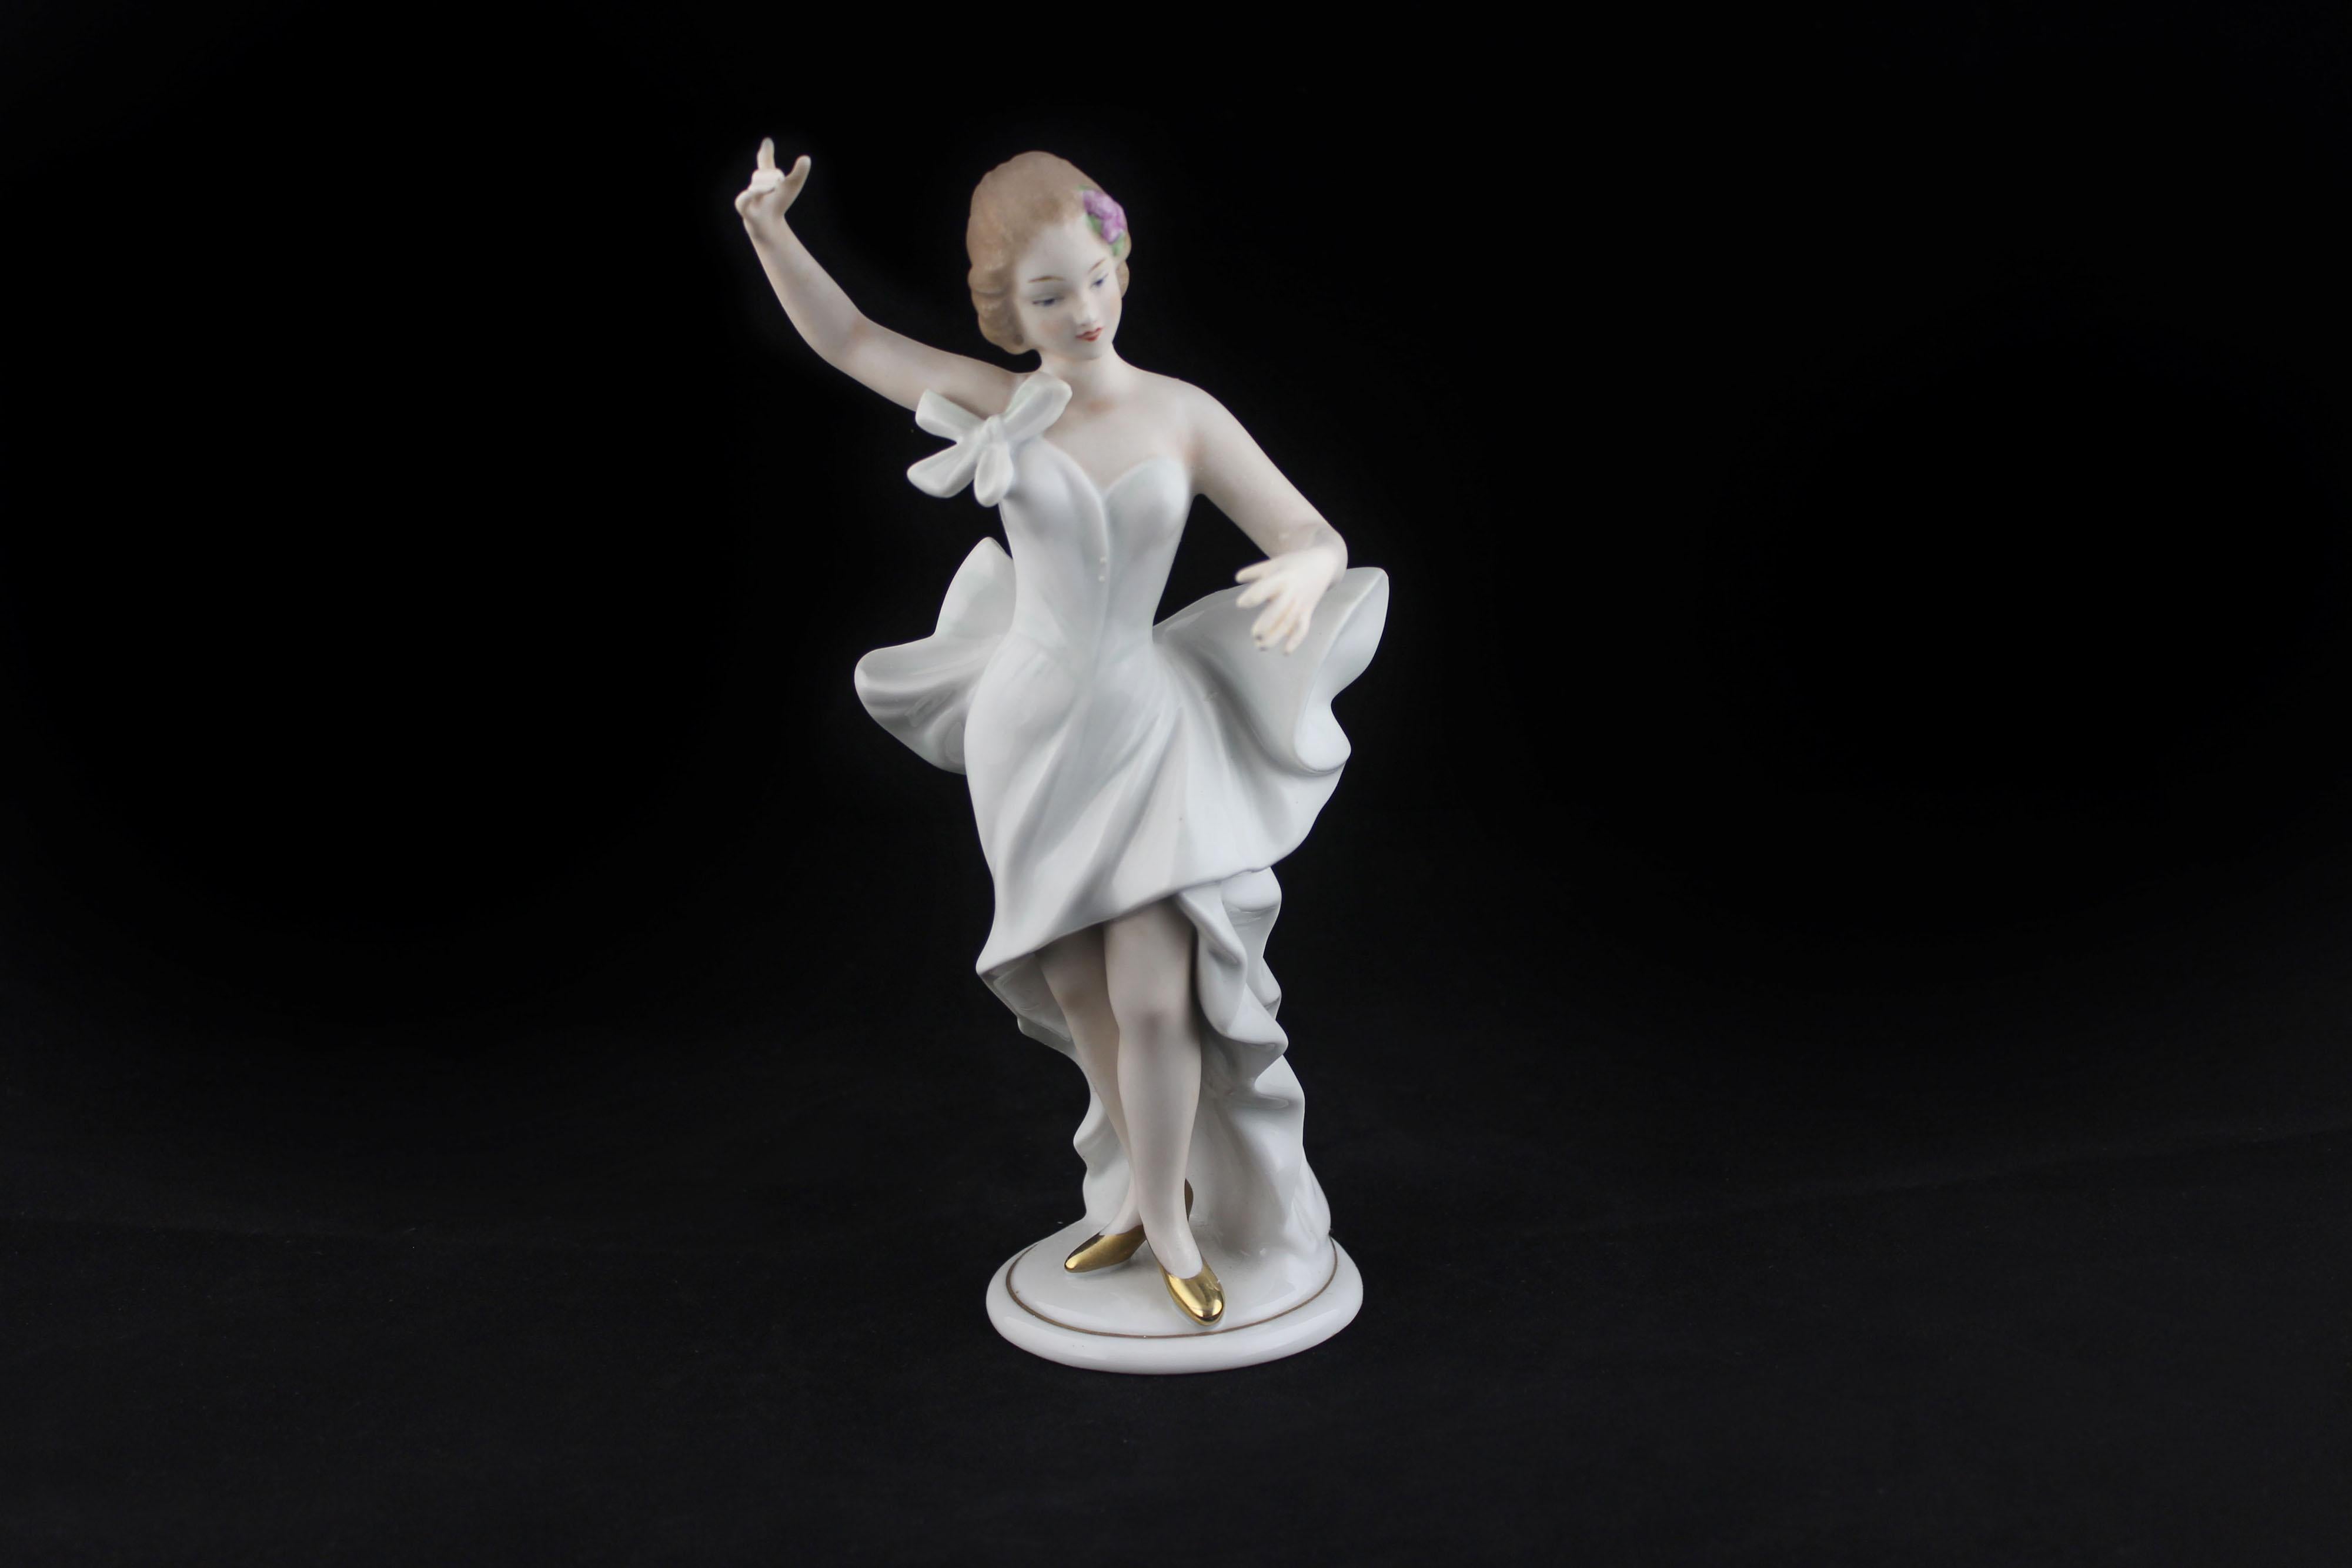 Ceramic sculpture of a girl with a bow dress with flower in her hair of Wallendorf.
